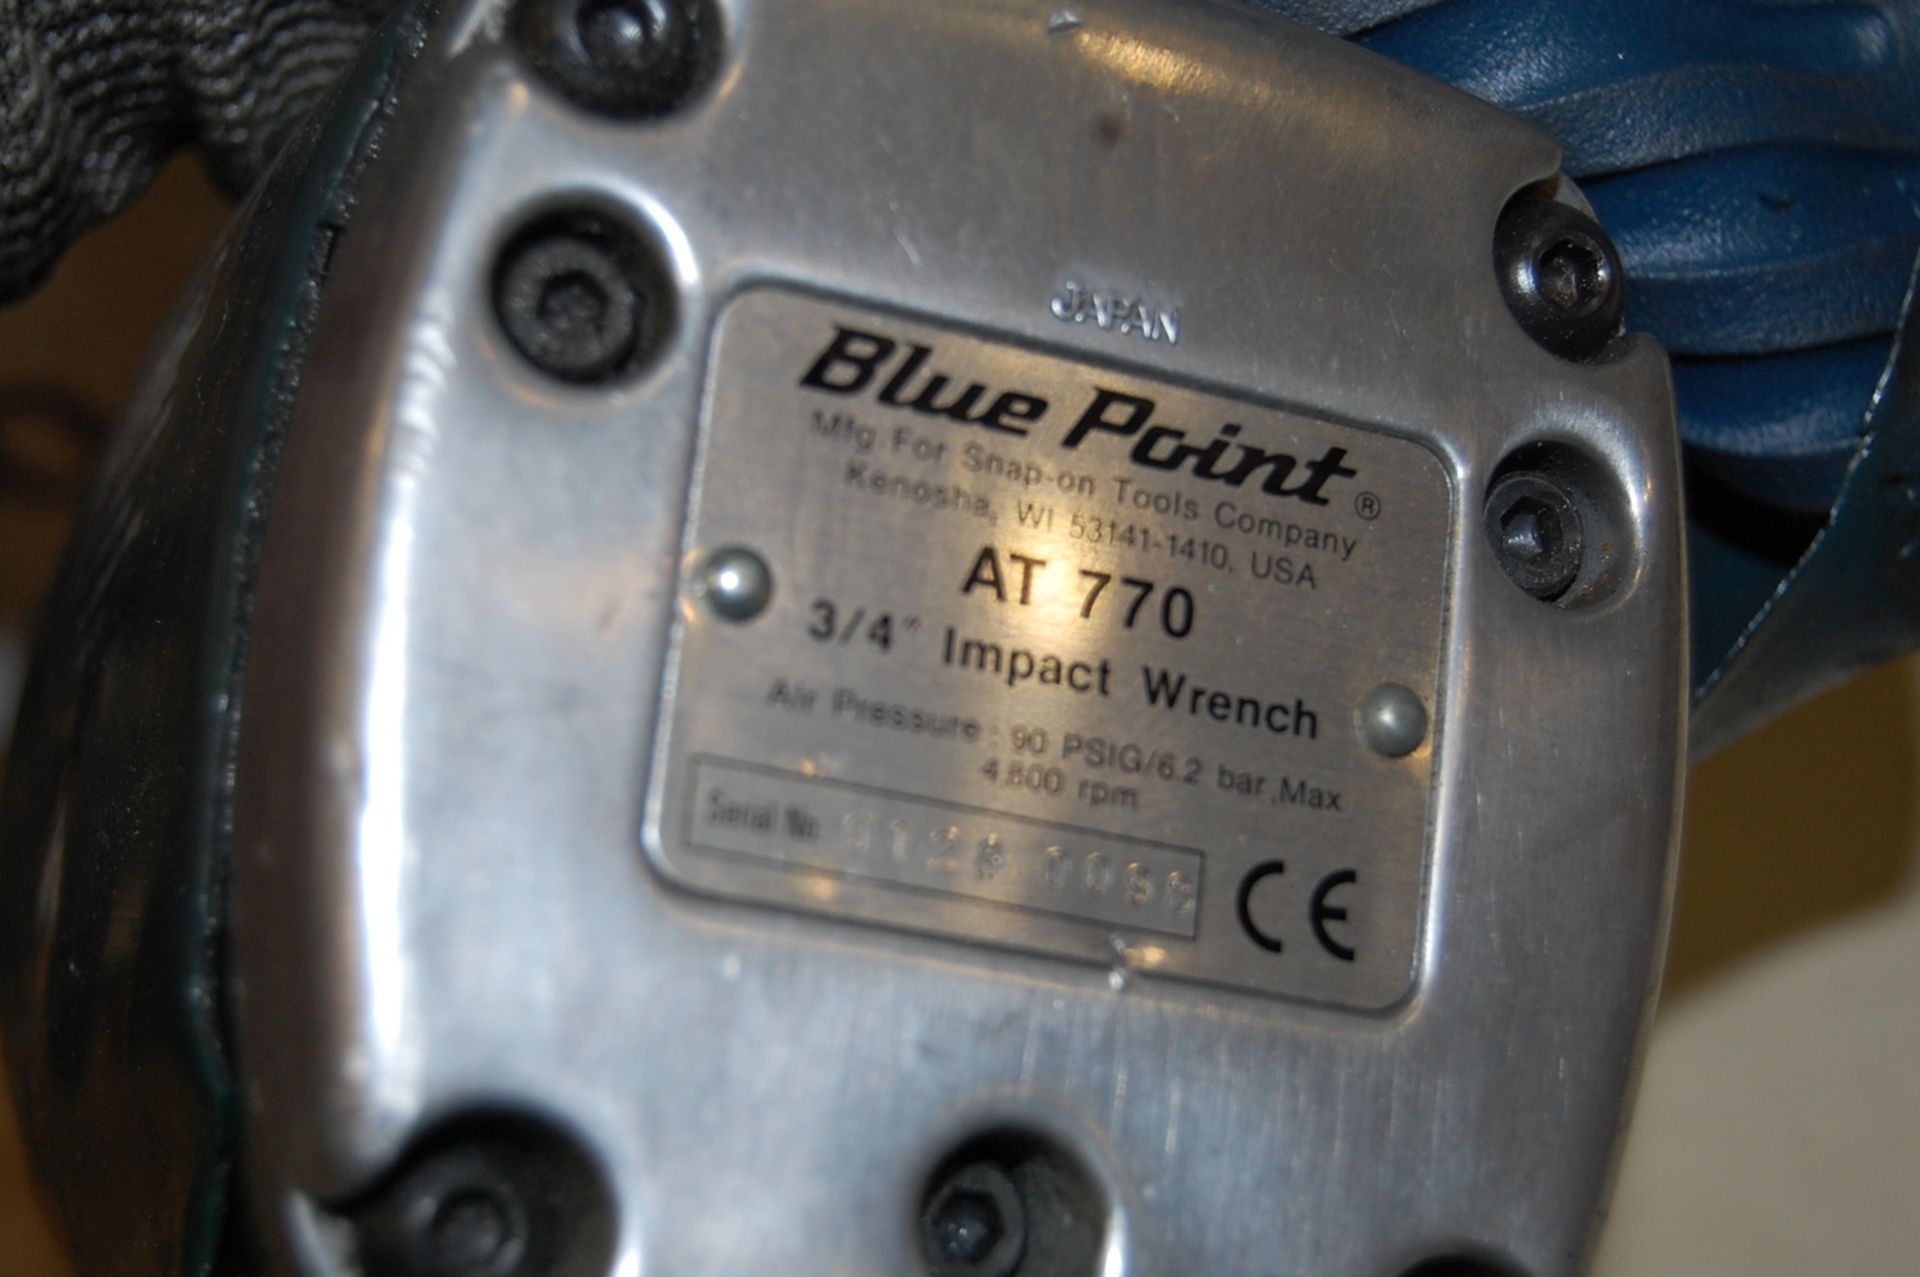 Blue Point Model AT 770 3/4" Air Impact Wrench - Image 4 of 4